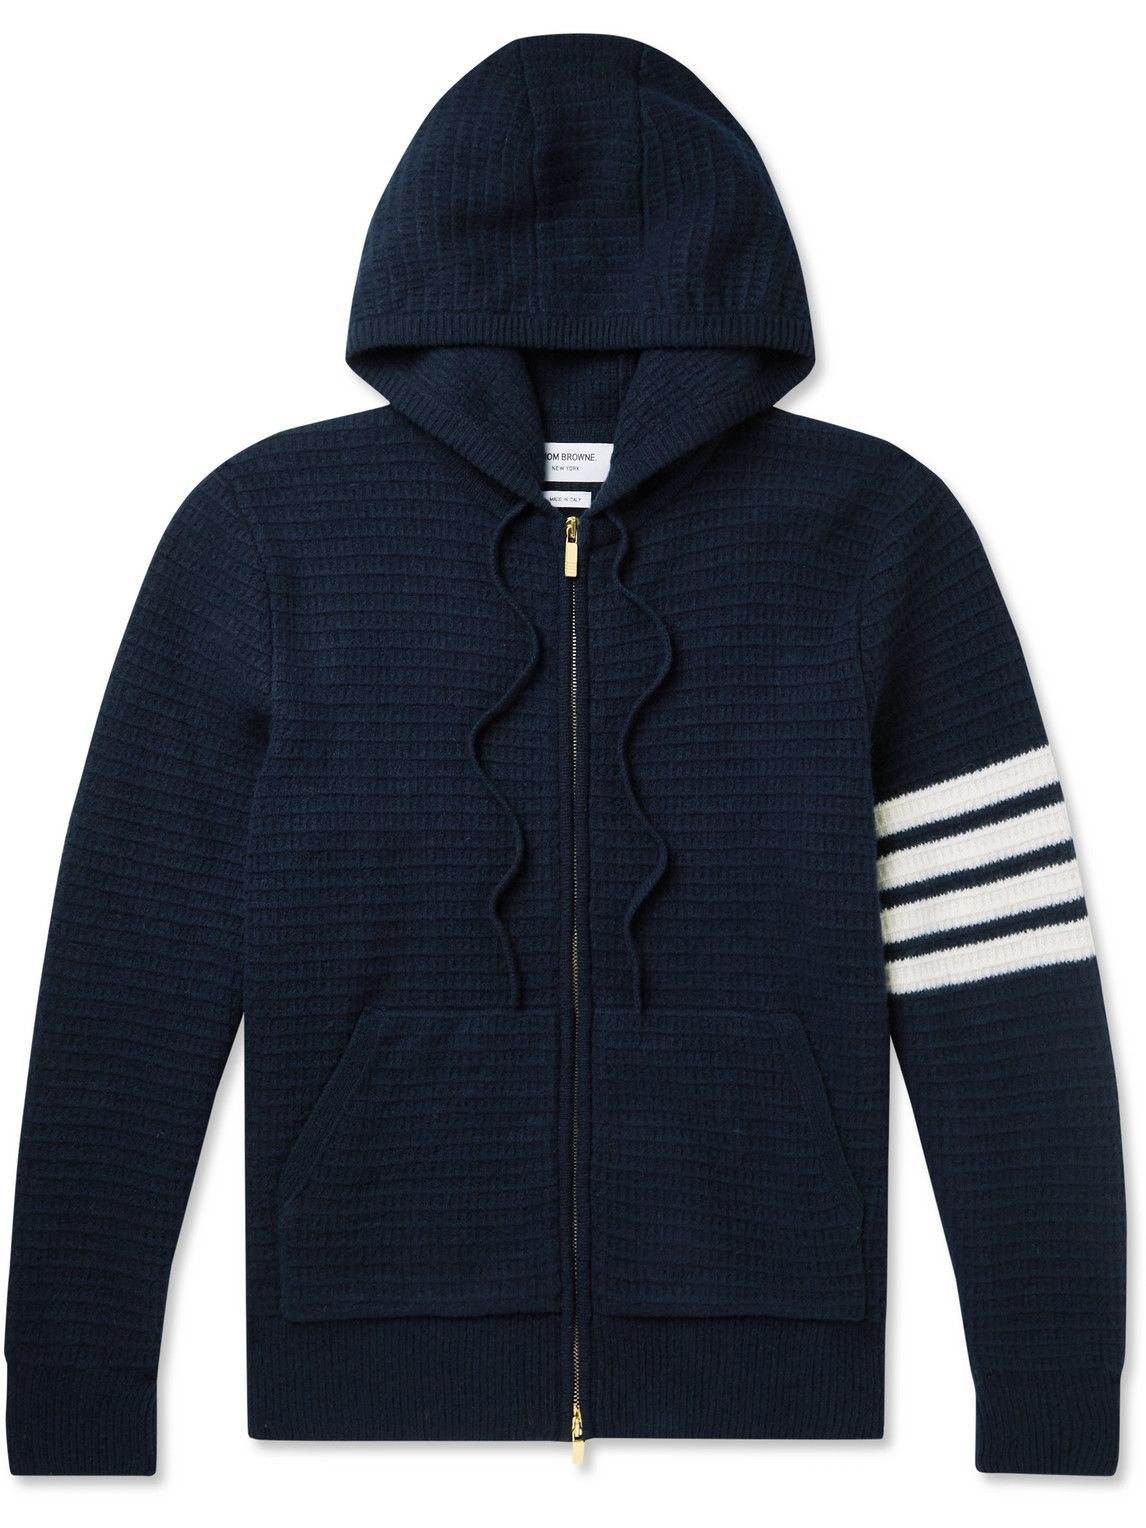 Thom Browne - Striped Waffle-Knit Wool and Cashmere-Blend Zip-Up Hoodie -  Blue Thom Browne